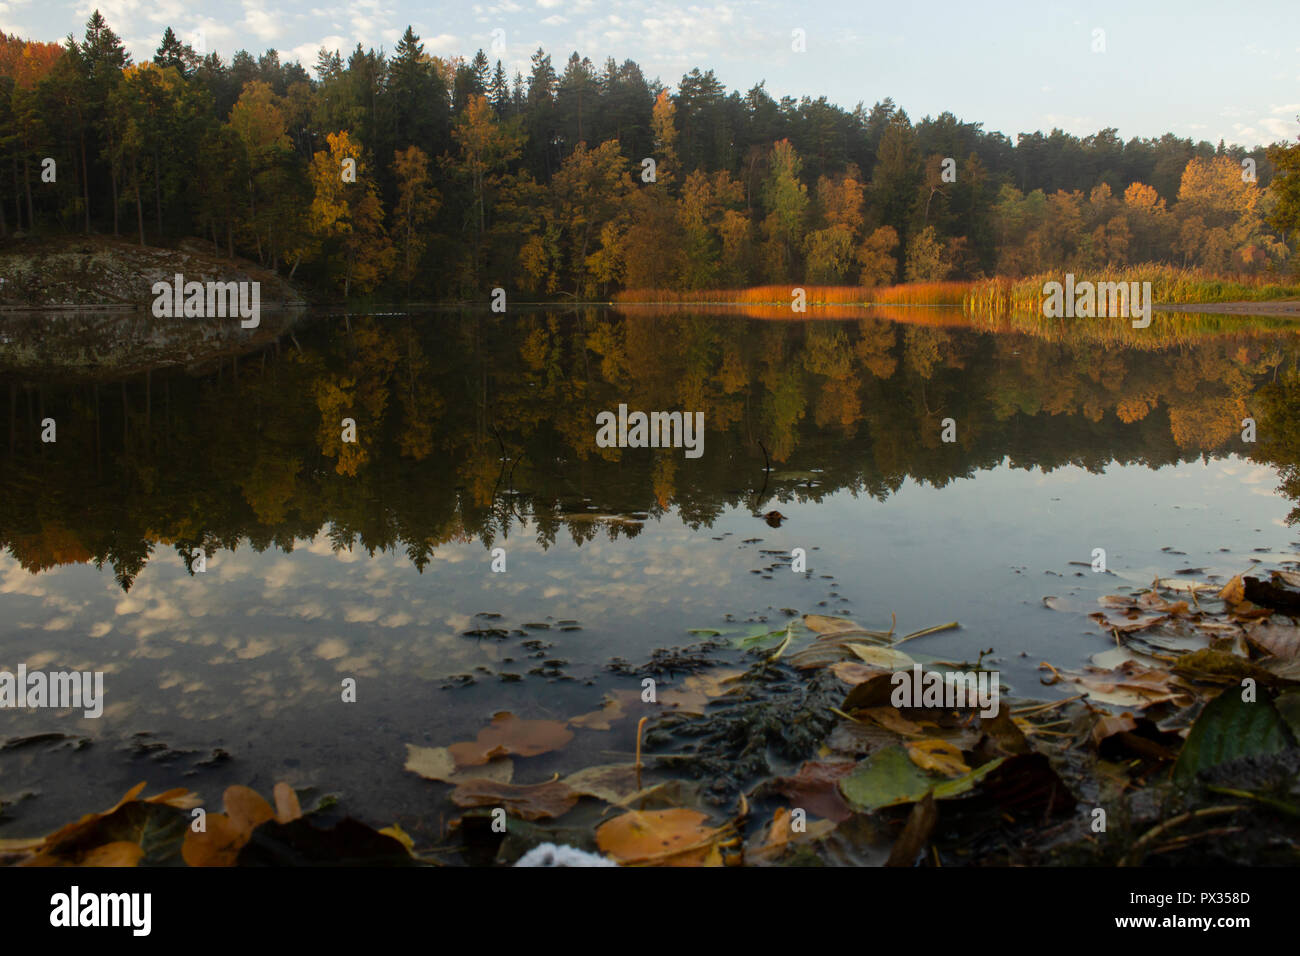 Autumn colored trees reflected in a forest lake. Fallen leaves in the foreground. Stock Photo